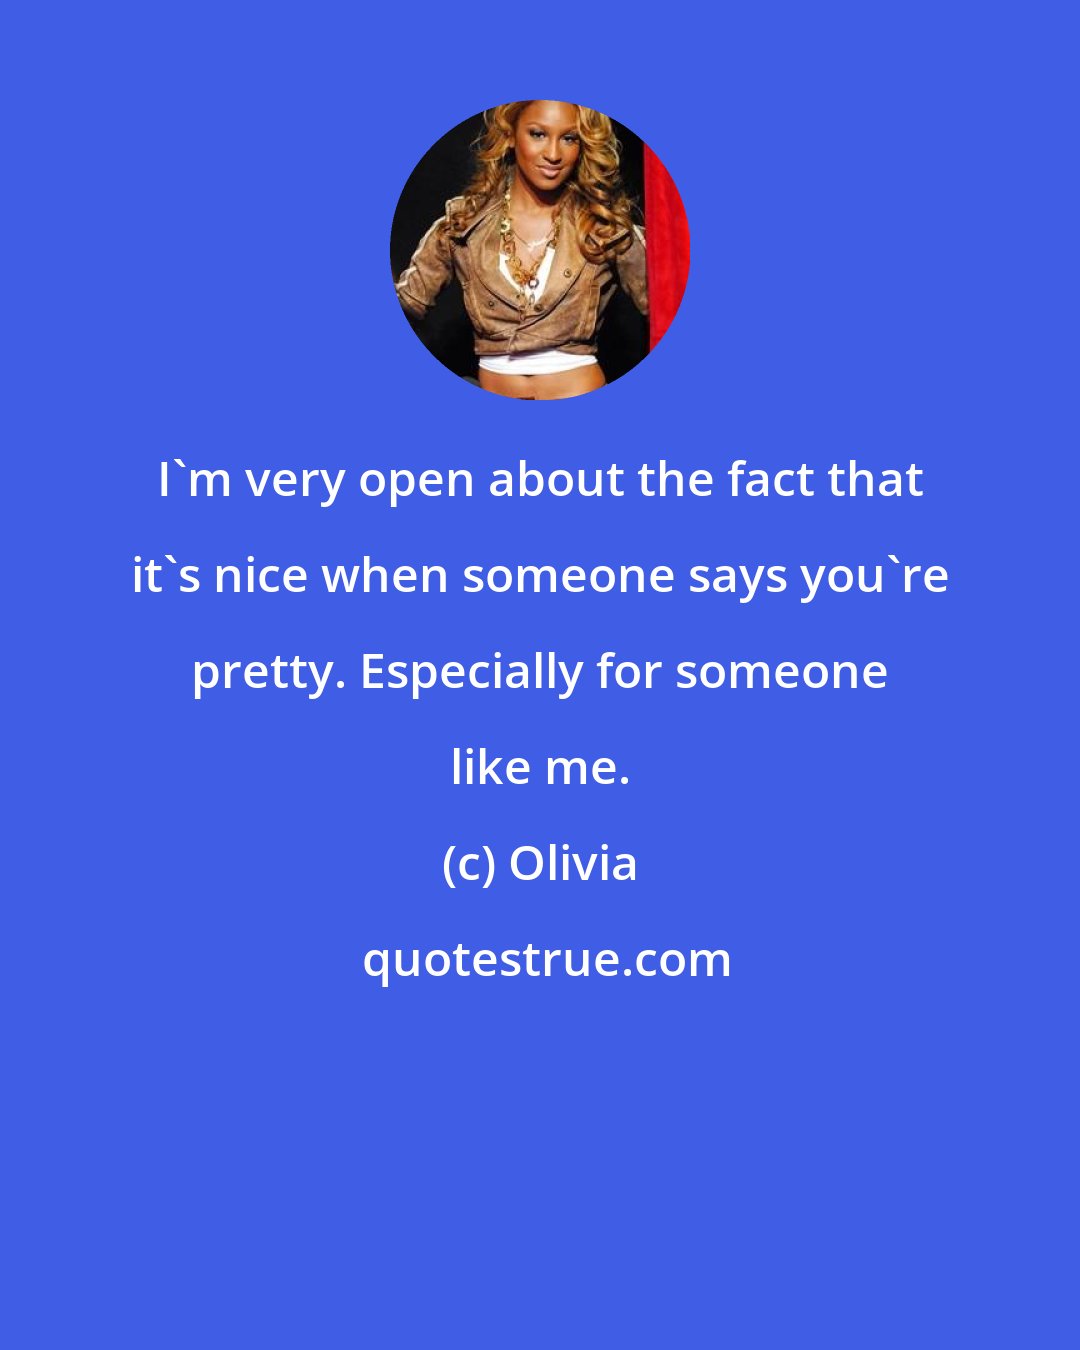 Olivia: I'm very open about the fact that it's nice when someone says you're pretty. Especially for someone like me.